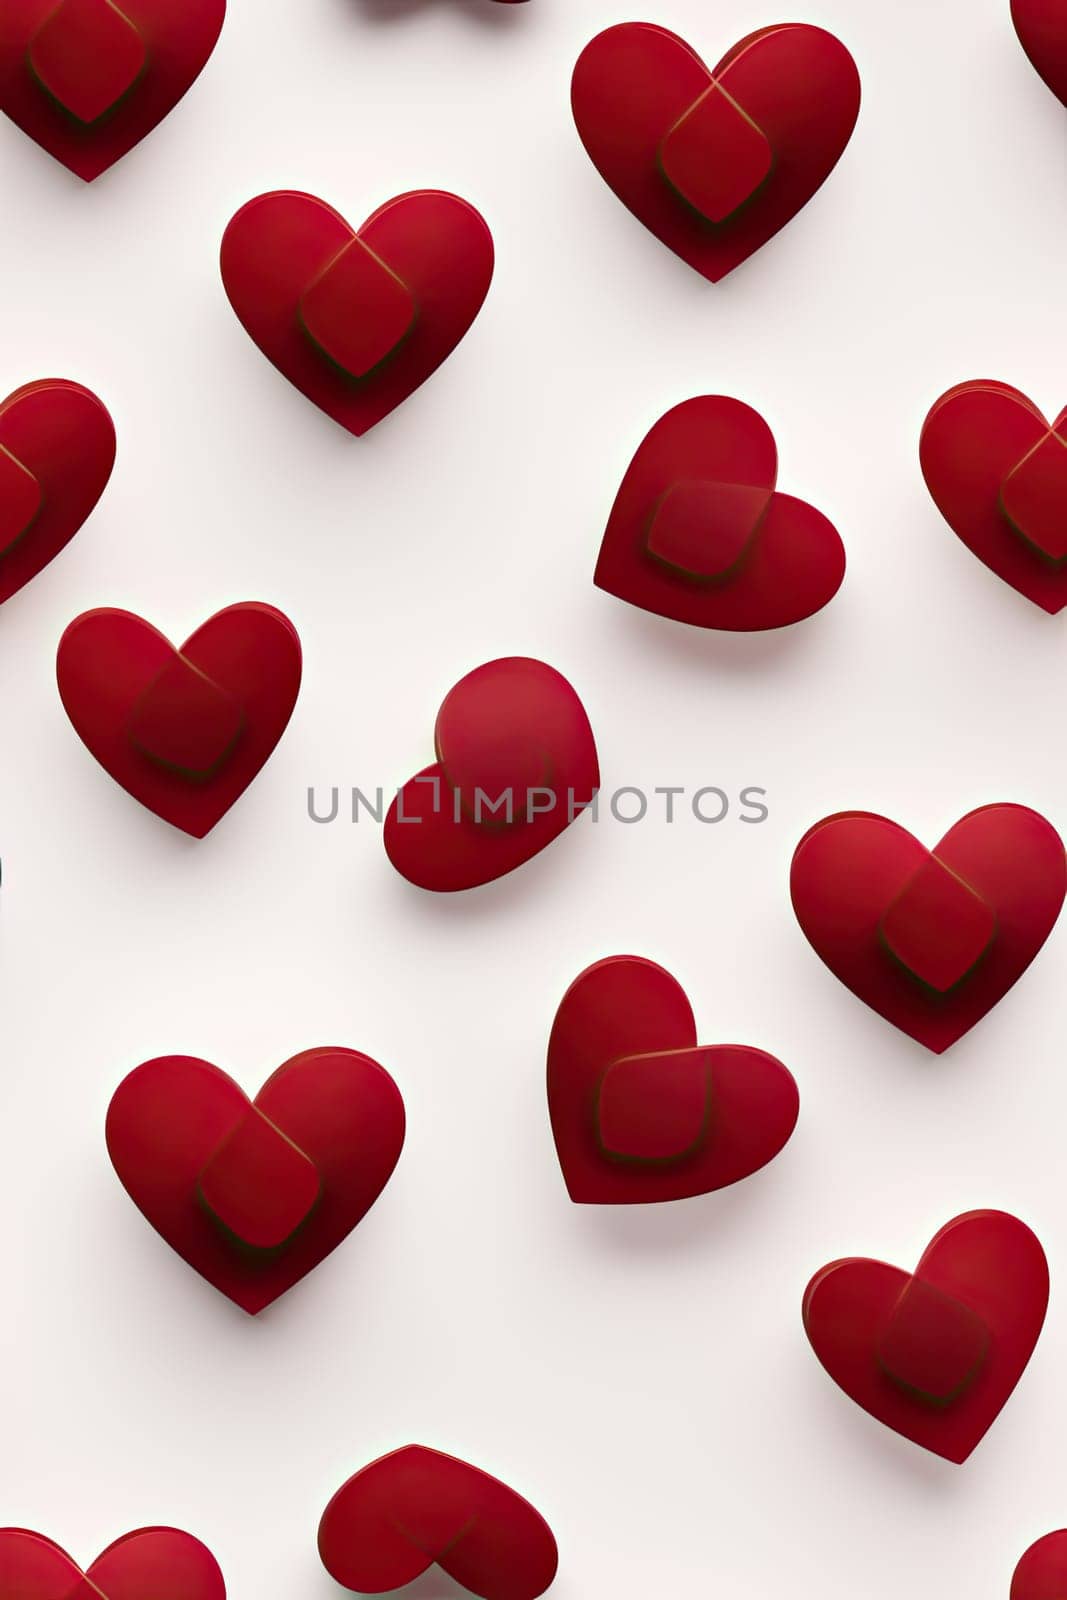 Valentines day love symbol, 3d hearts in vertical isolated on white background by papatonic